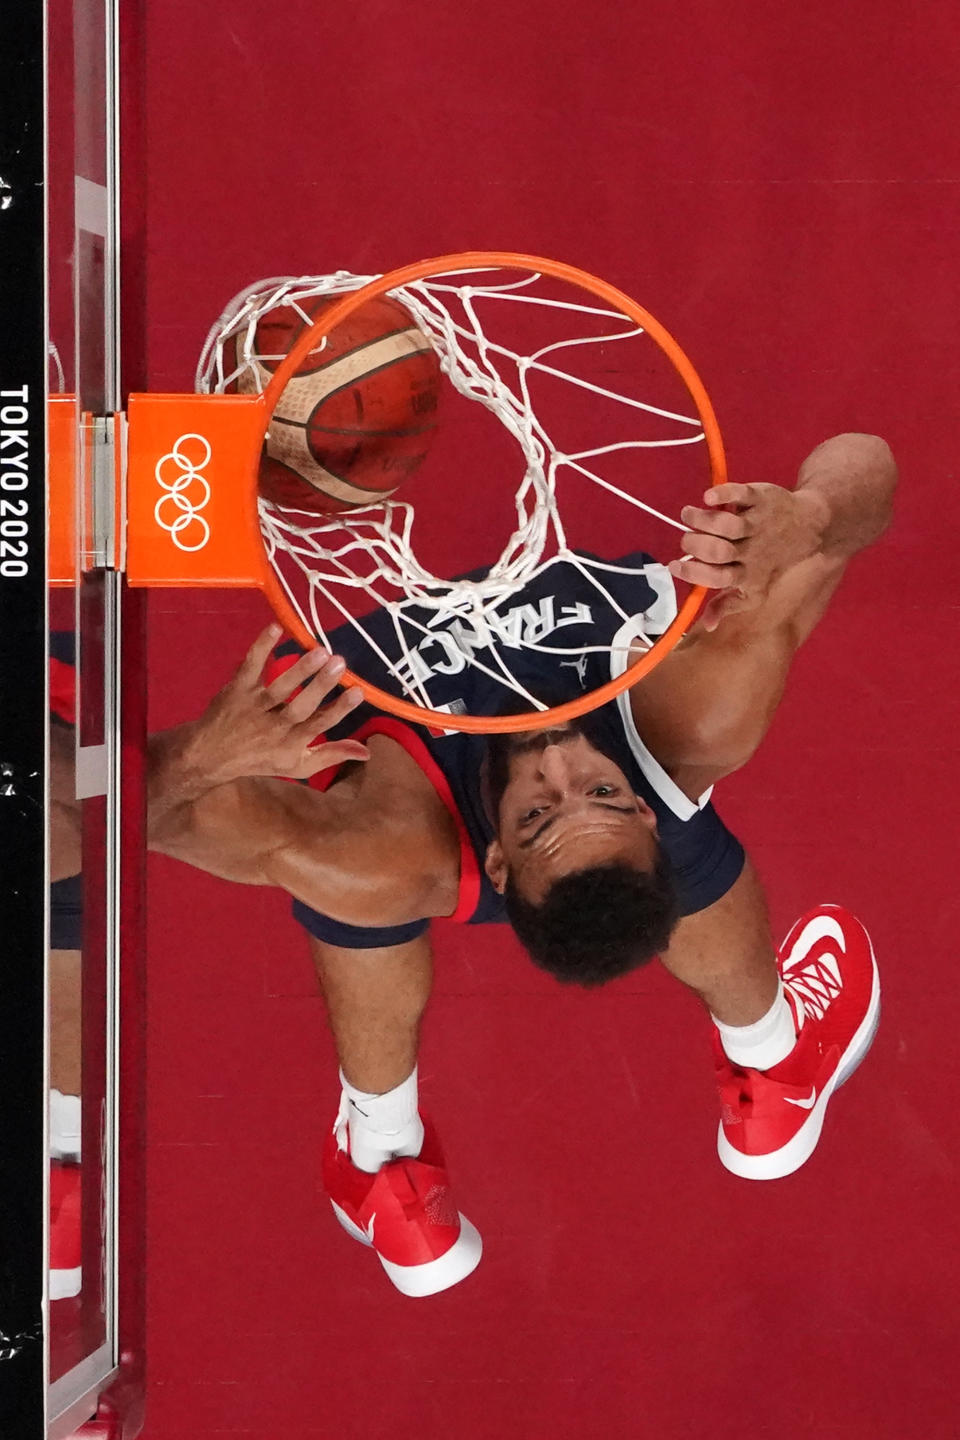 <p>France's Rudy Gobert dunks the ball in the men's preliminary round group A basketball match between Iran and France during the Tokyo 2020 Olympic Games at the Saitama Super Arena in Saitama on July 31, 2021. (Photo by Brian SNYDER / POOL / AFP)</p> 